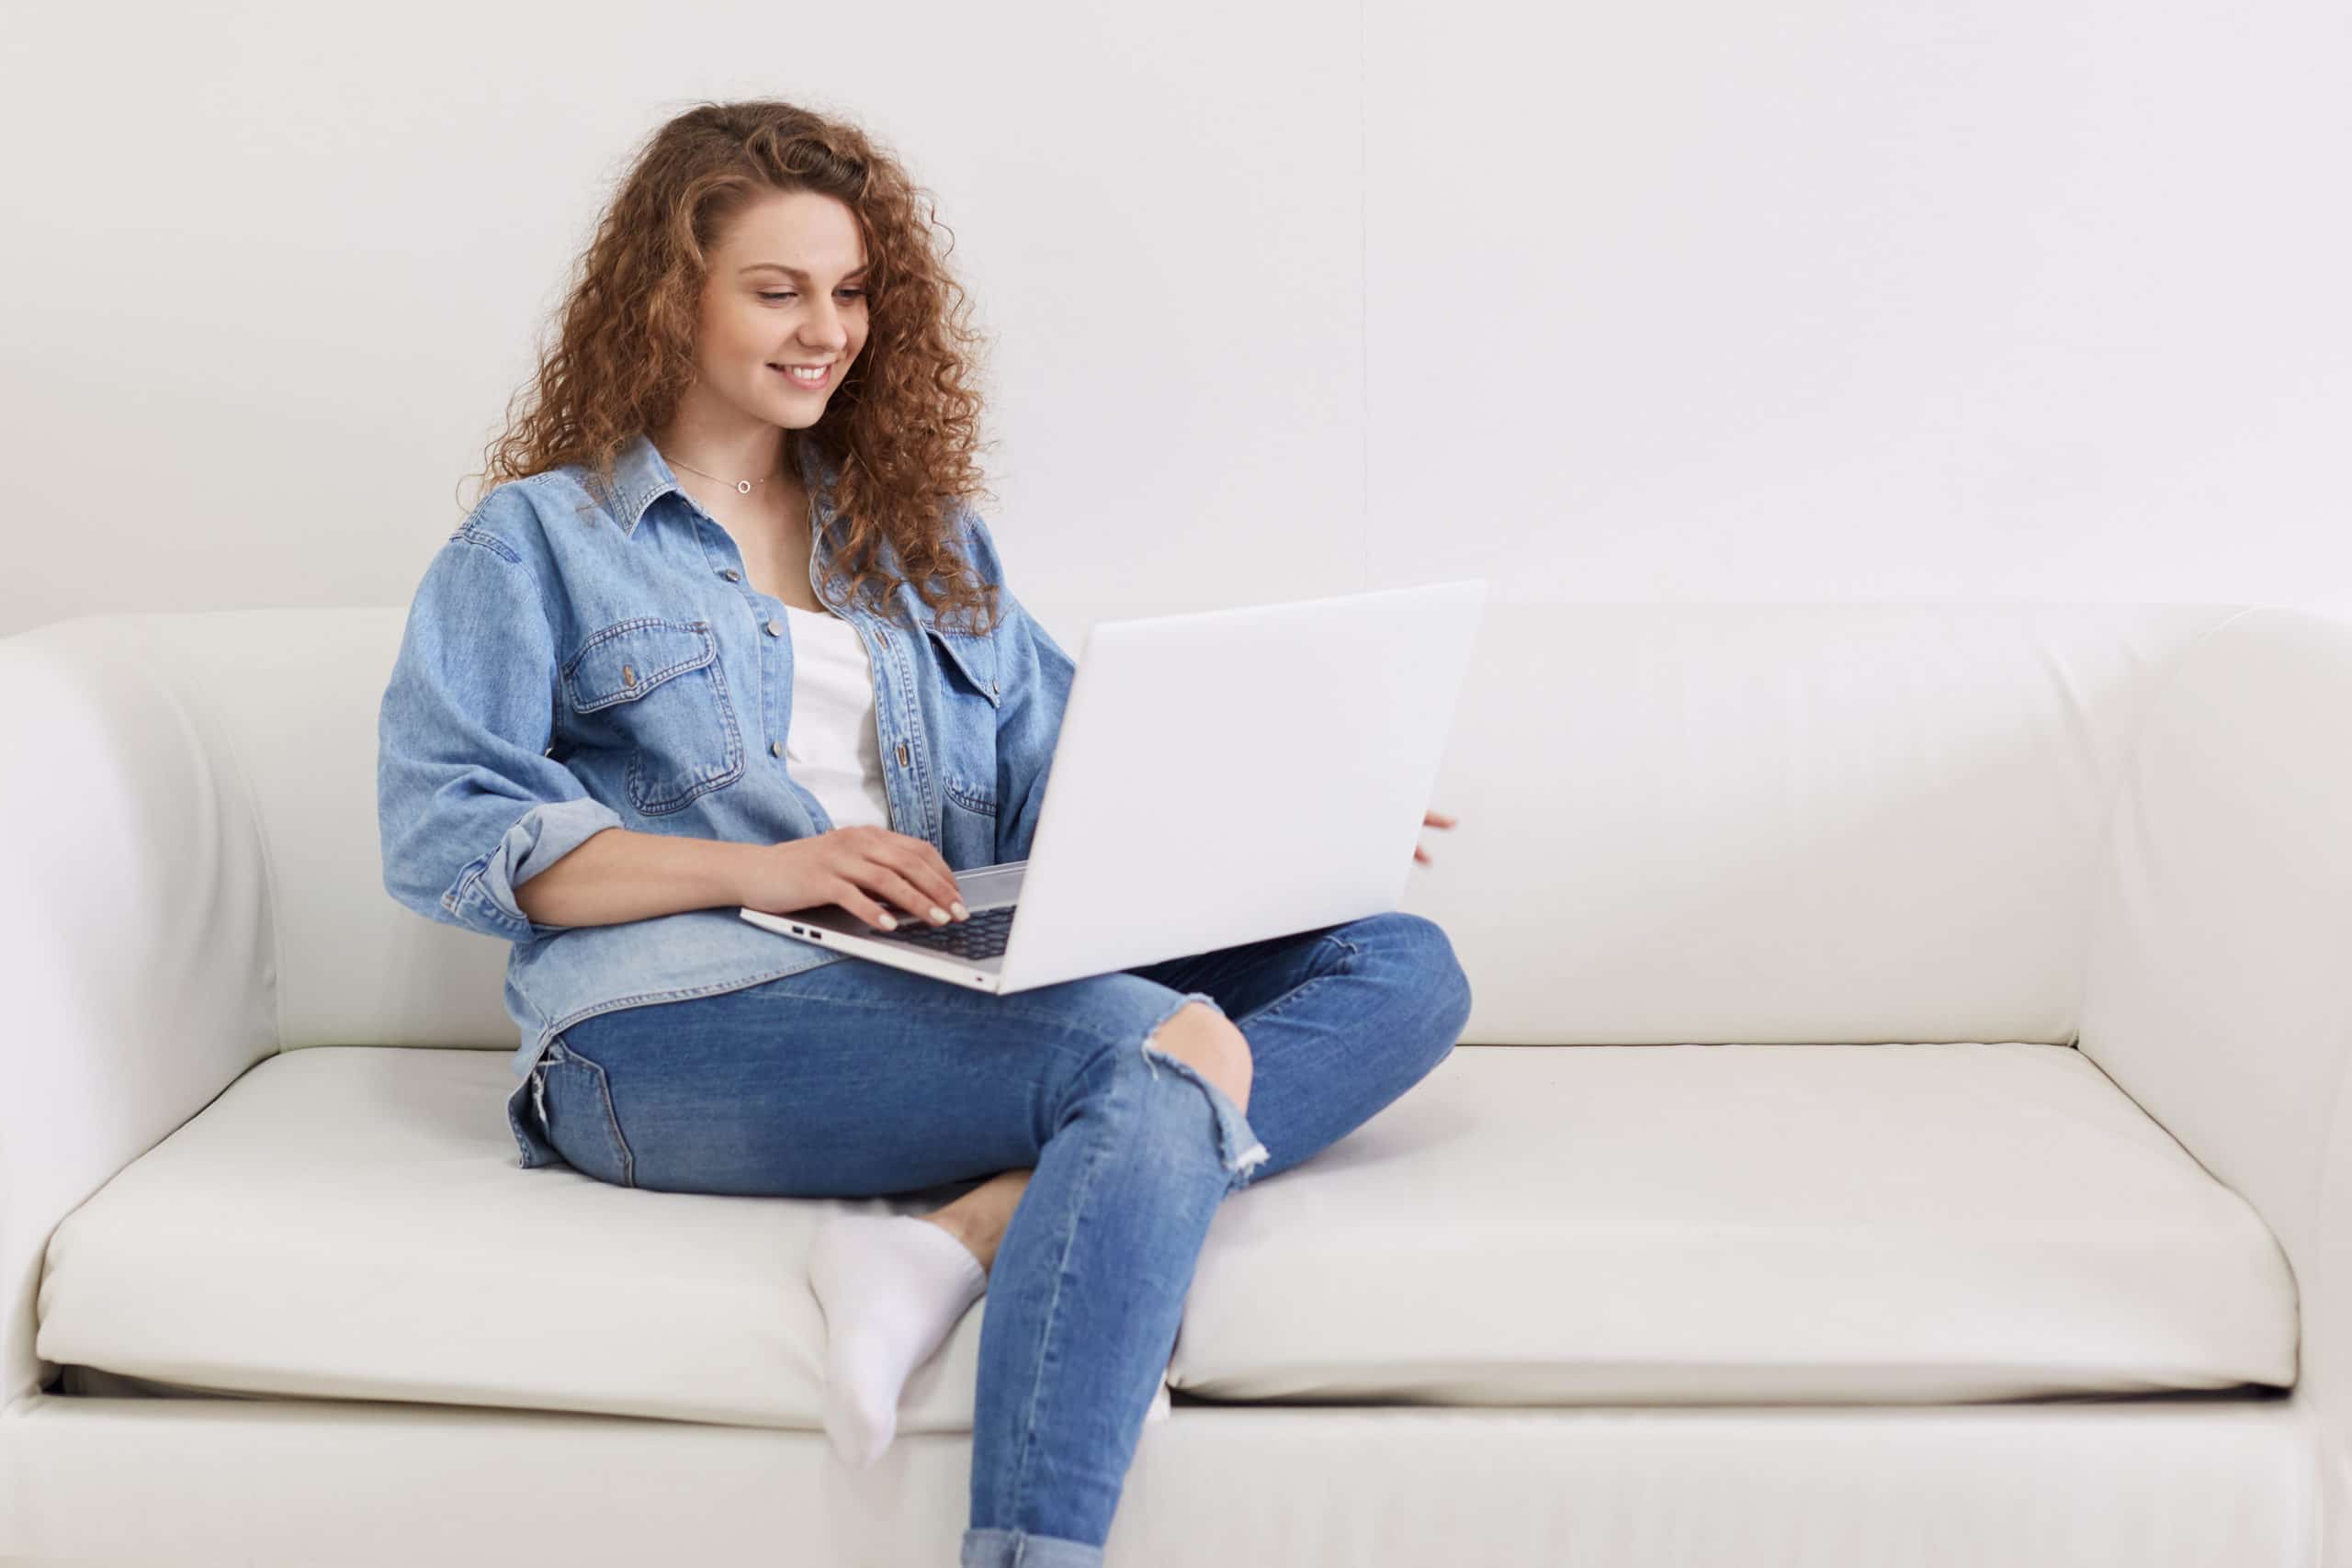 Horizontal shot of nice looking lovely attractive woman, focused curly haired girl sitting on white sofa while working remotely part time, using her modern portable computer and wireless Internet.